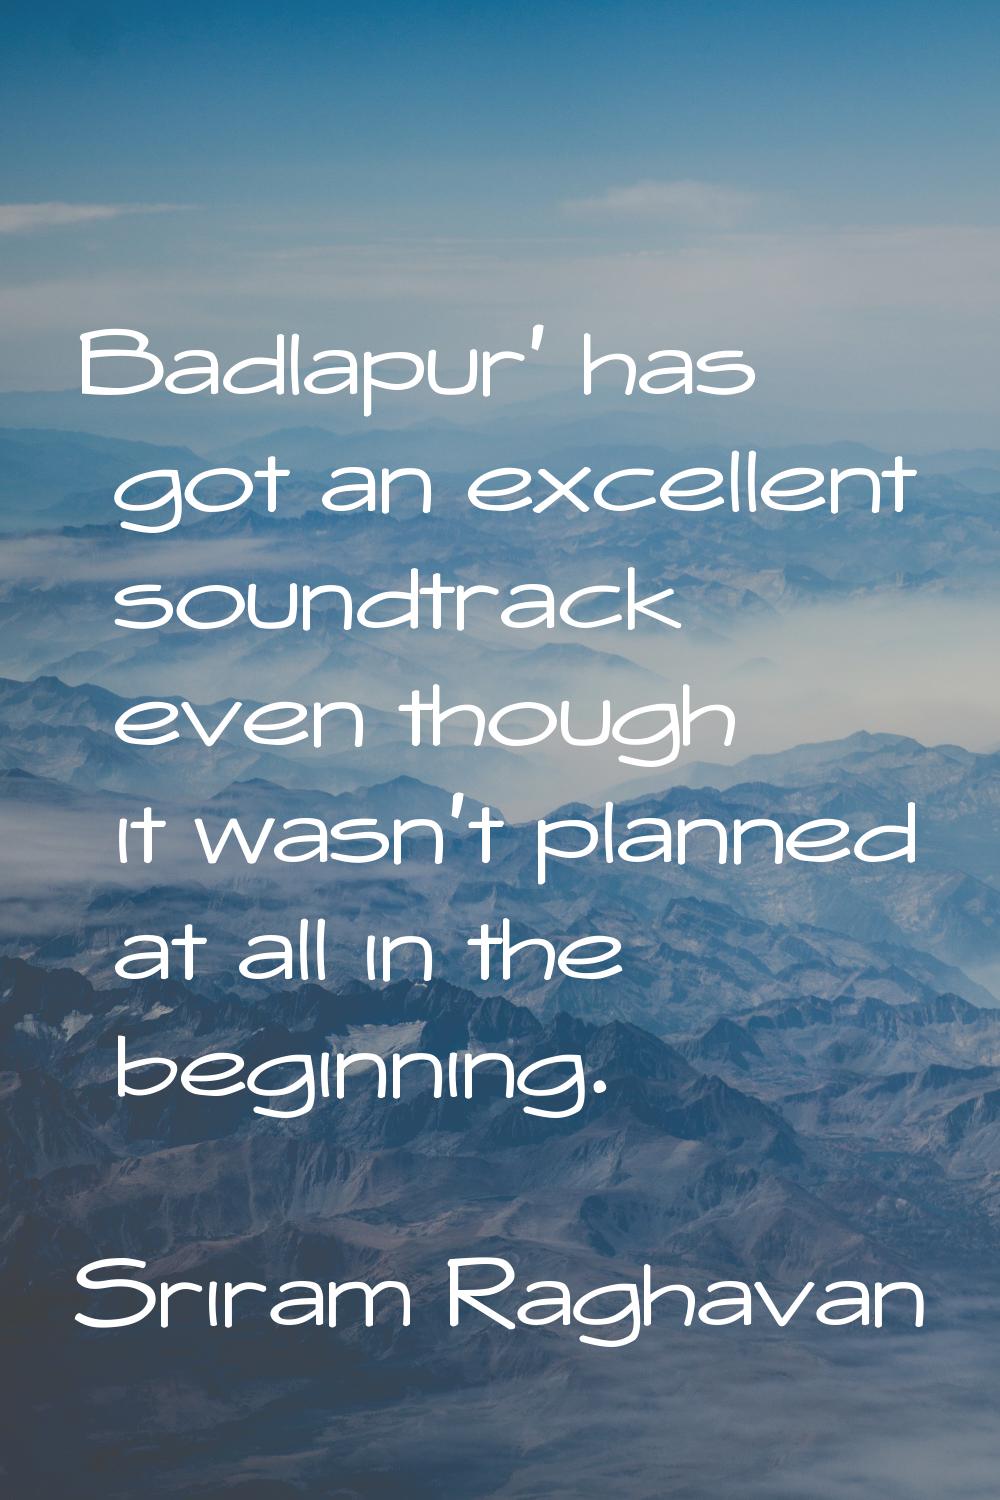 Badlapur' has got an excellent soundtrack even though it wasn’t planned at all in the beginning.